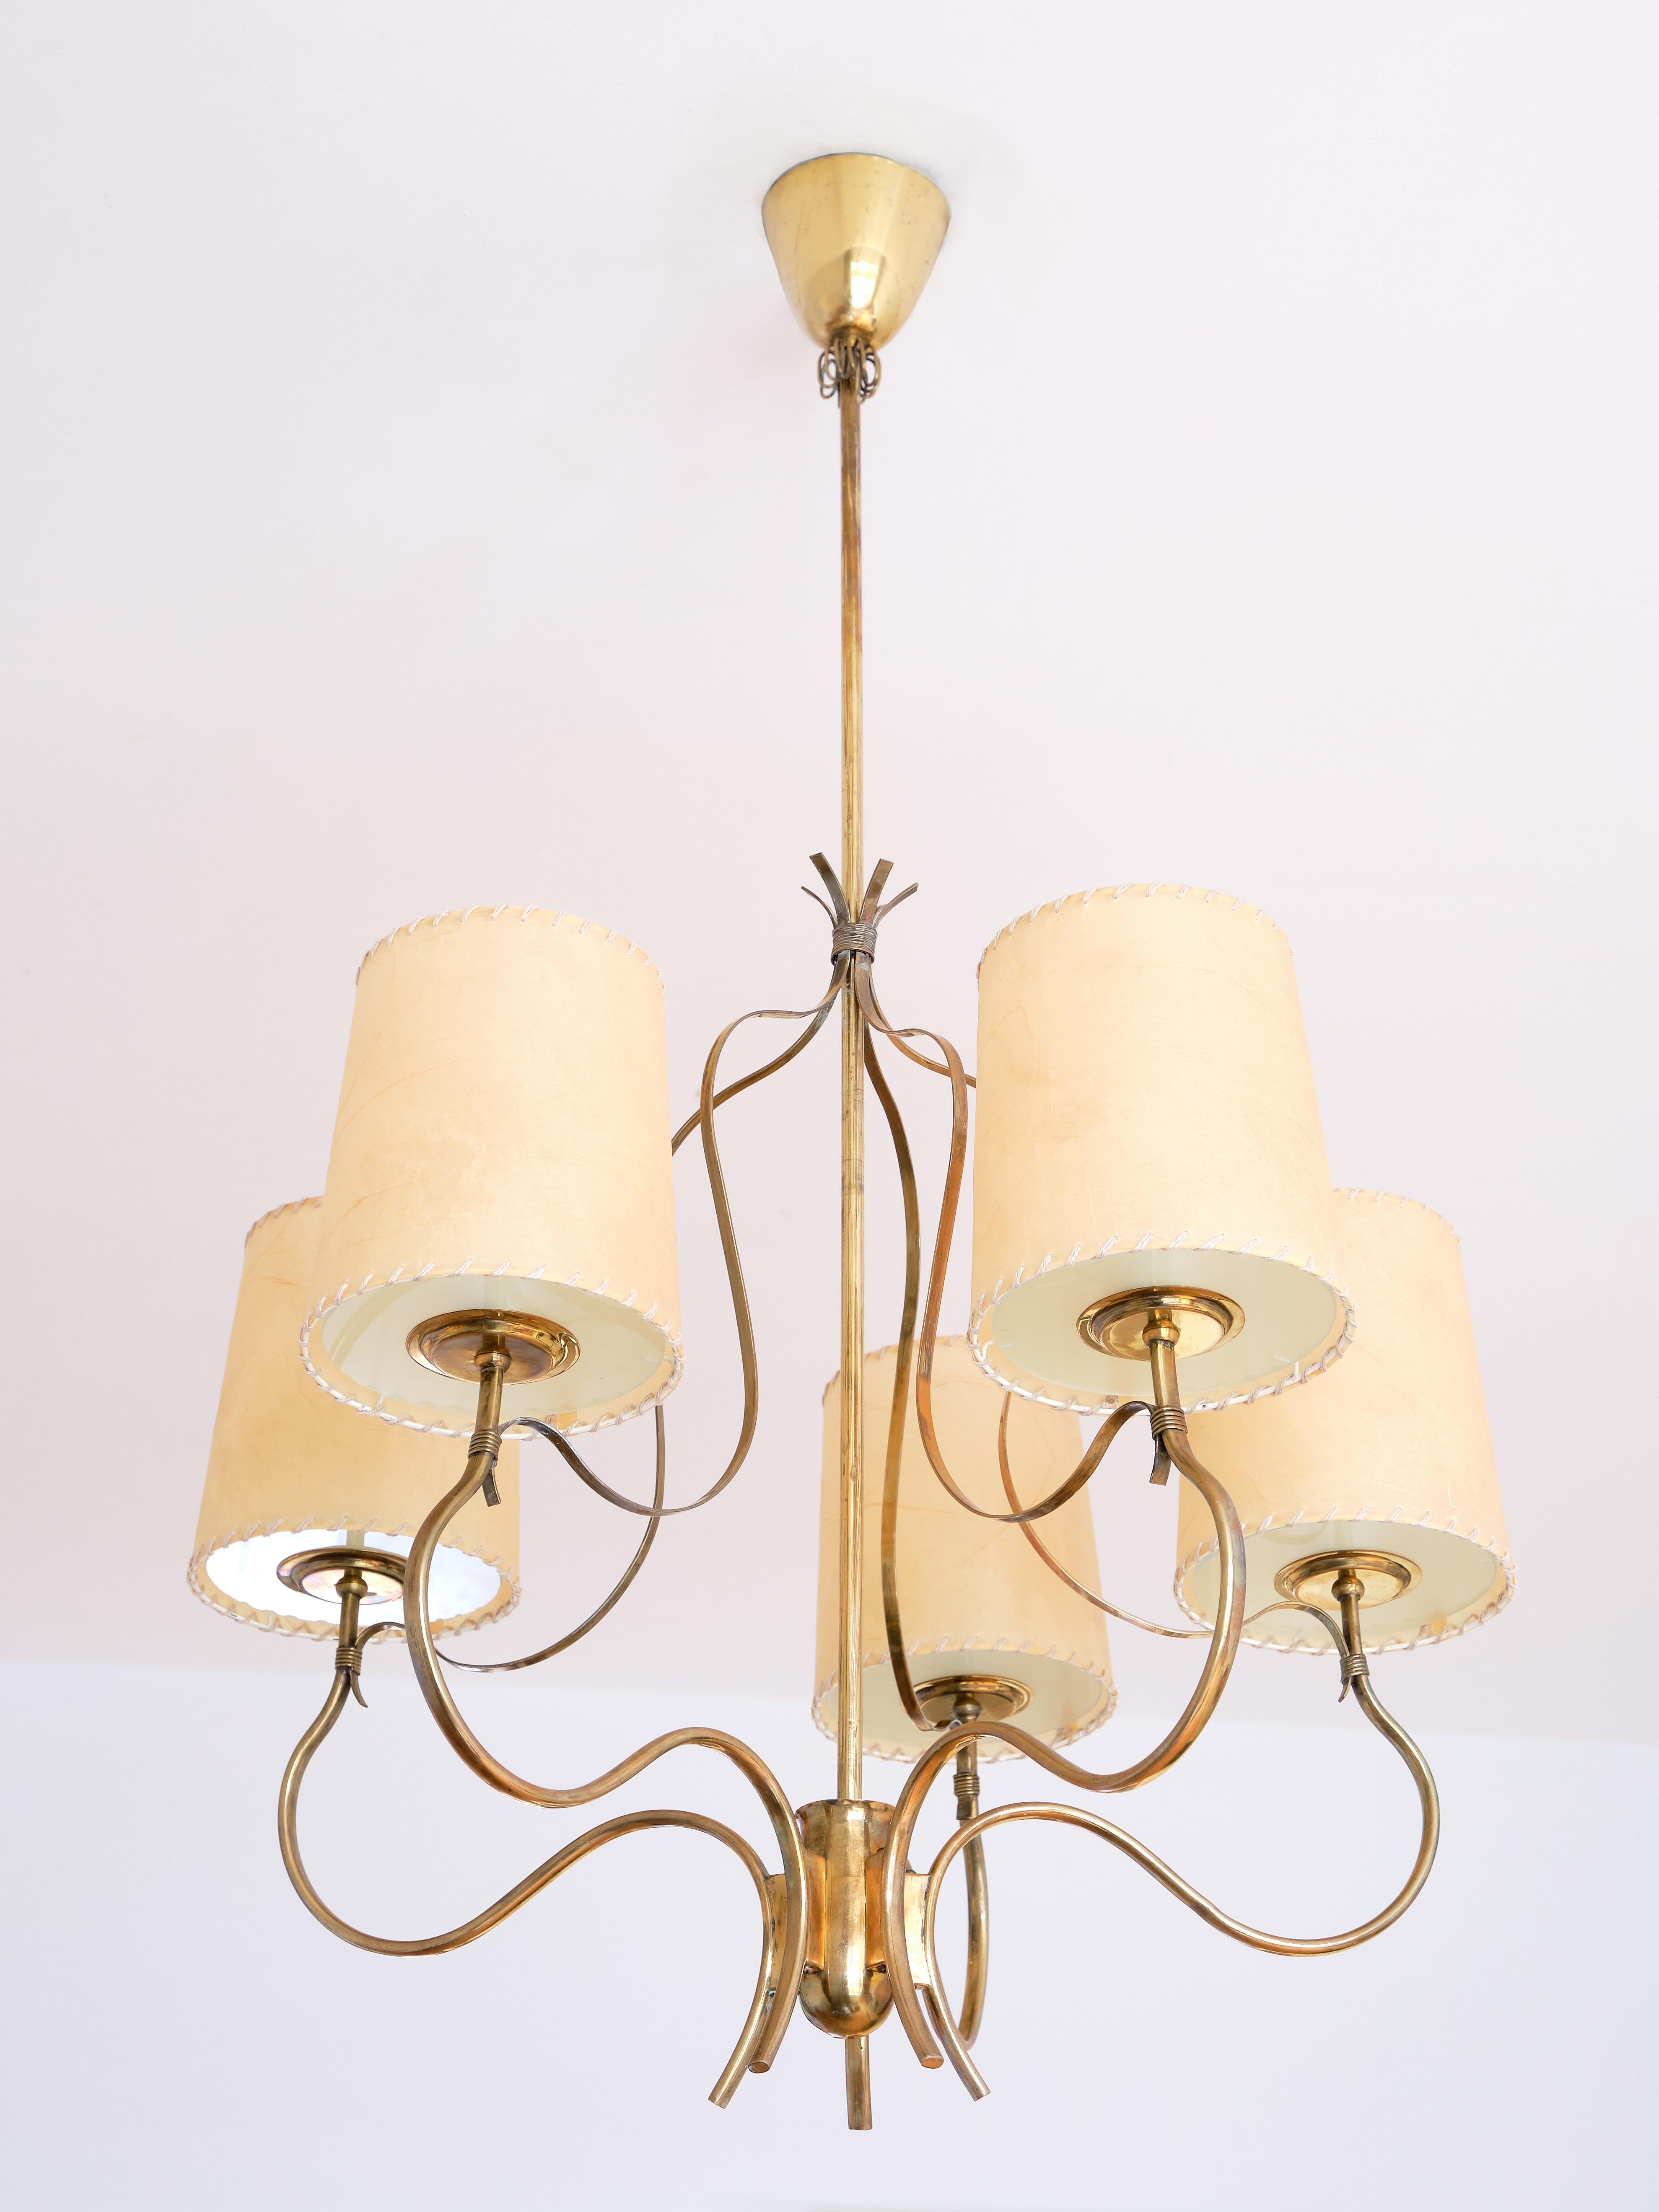 Paavo Tynell Chandelier in Brass and Parchment, Model 9001, Taito Finland, 1940s In Good Condition For Sale In The Hague, NL